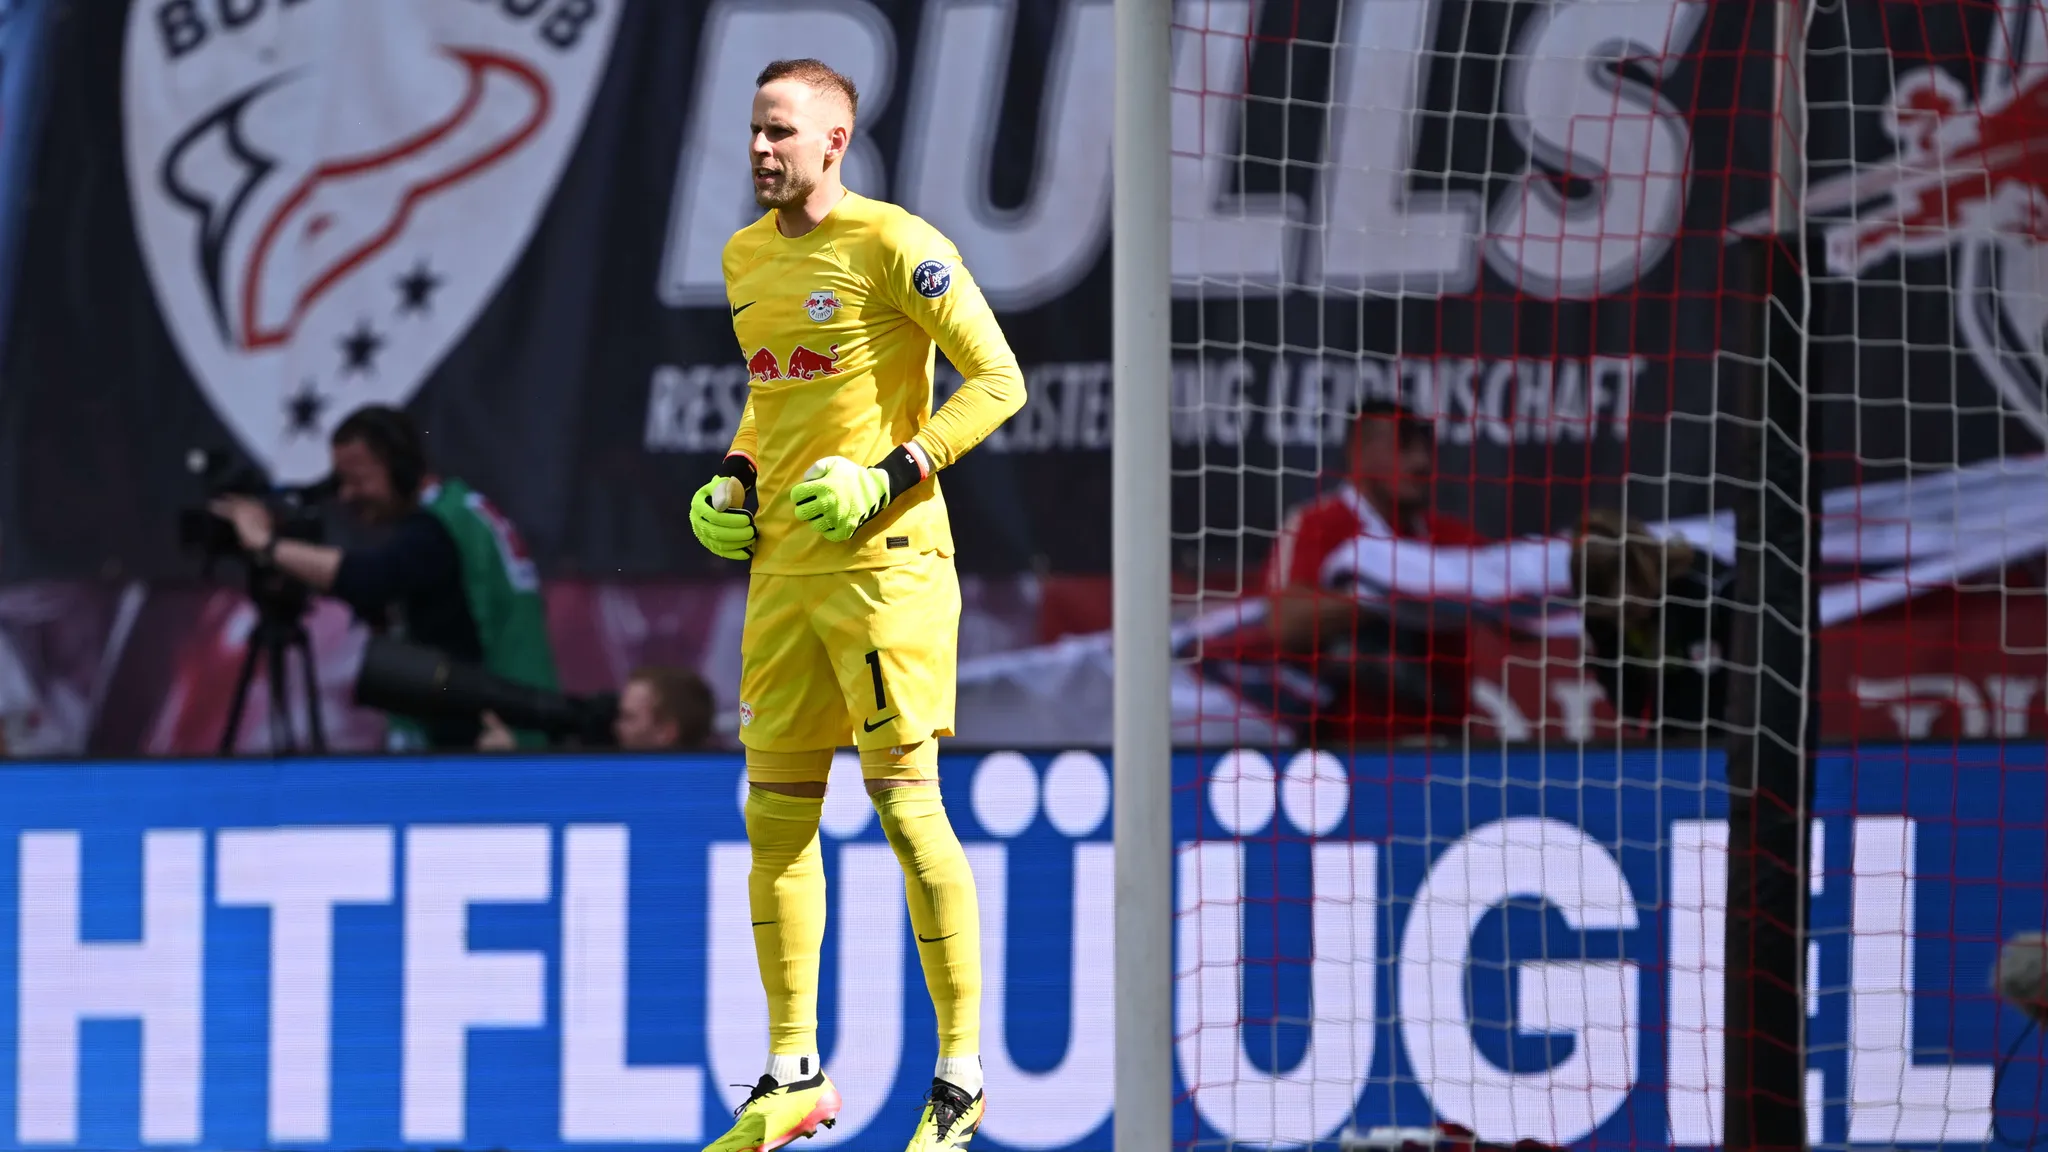 Peter Gulacsi in RBL's goal for the 300th time.